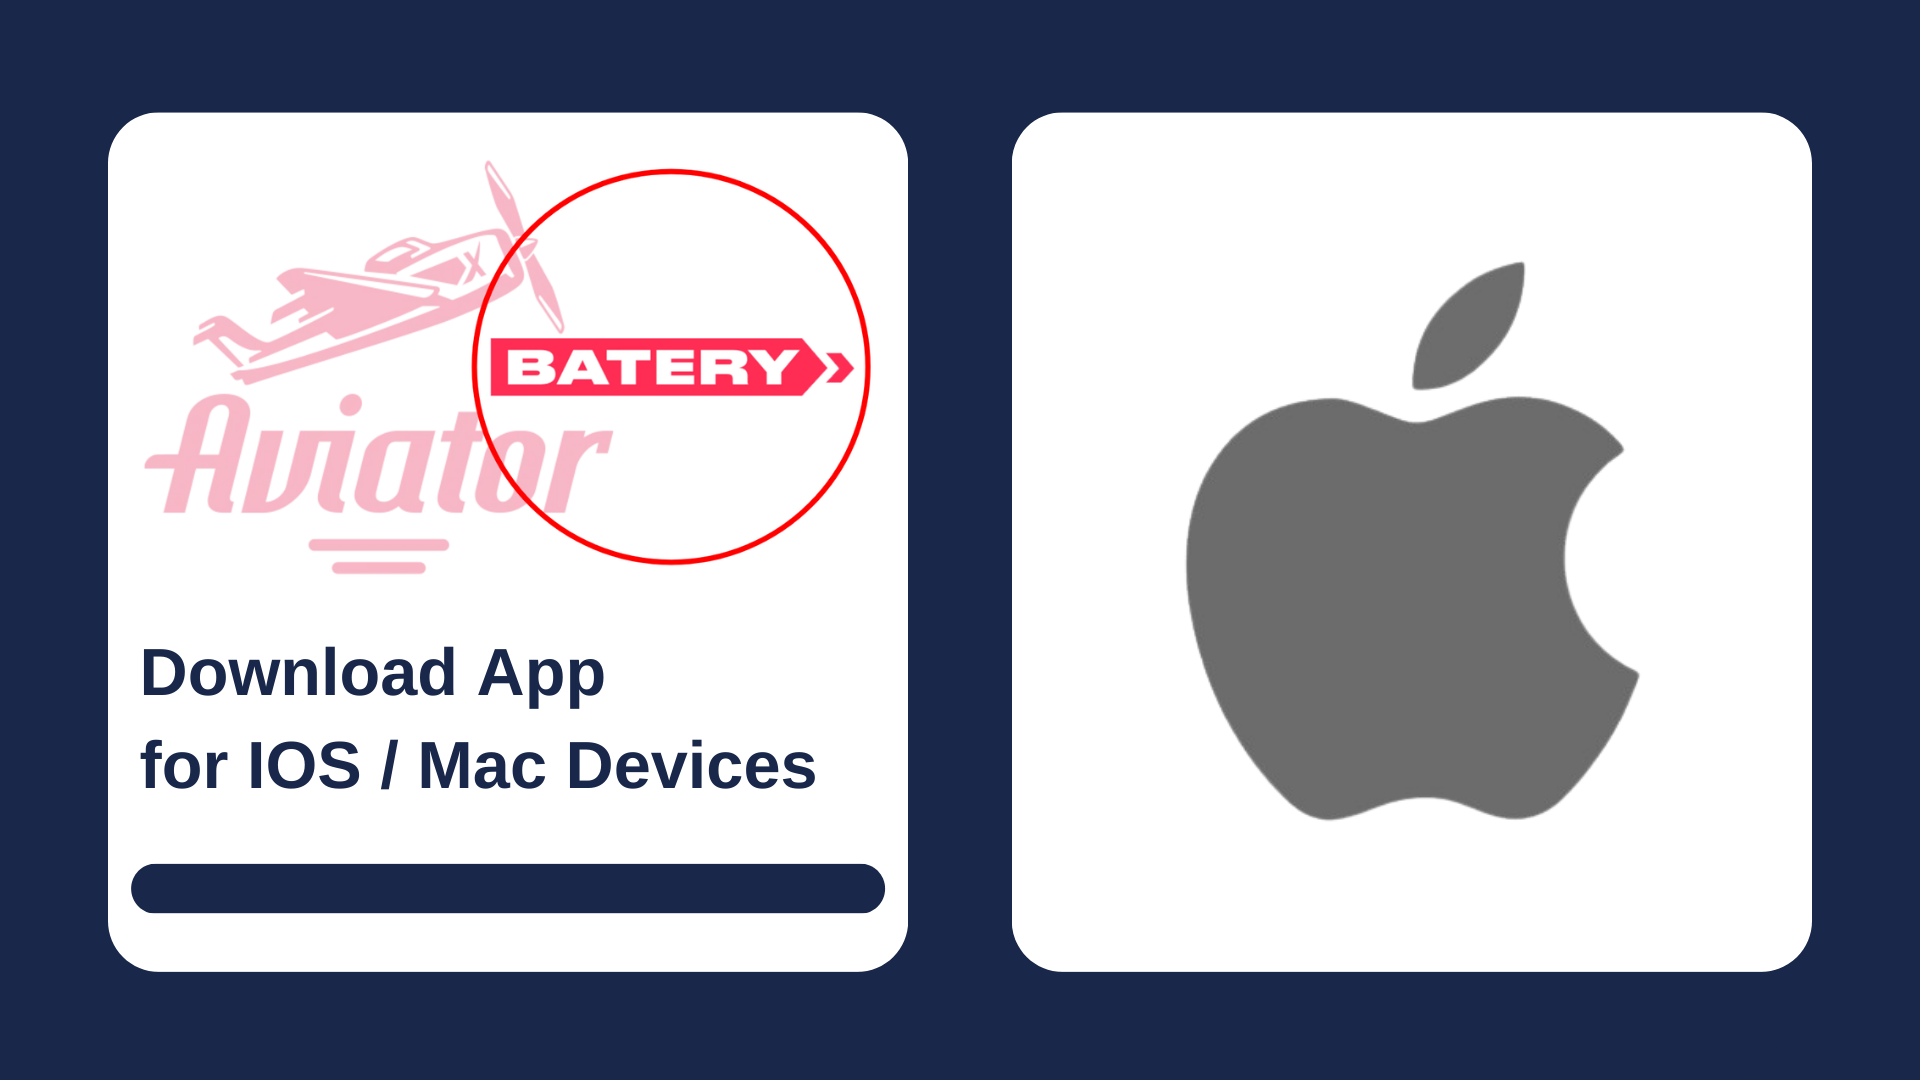 First picture showing Aviator and Batery logos with text, and second - IOS icon